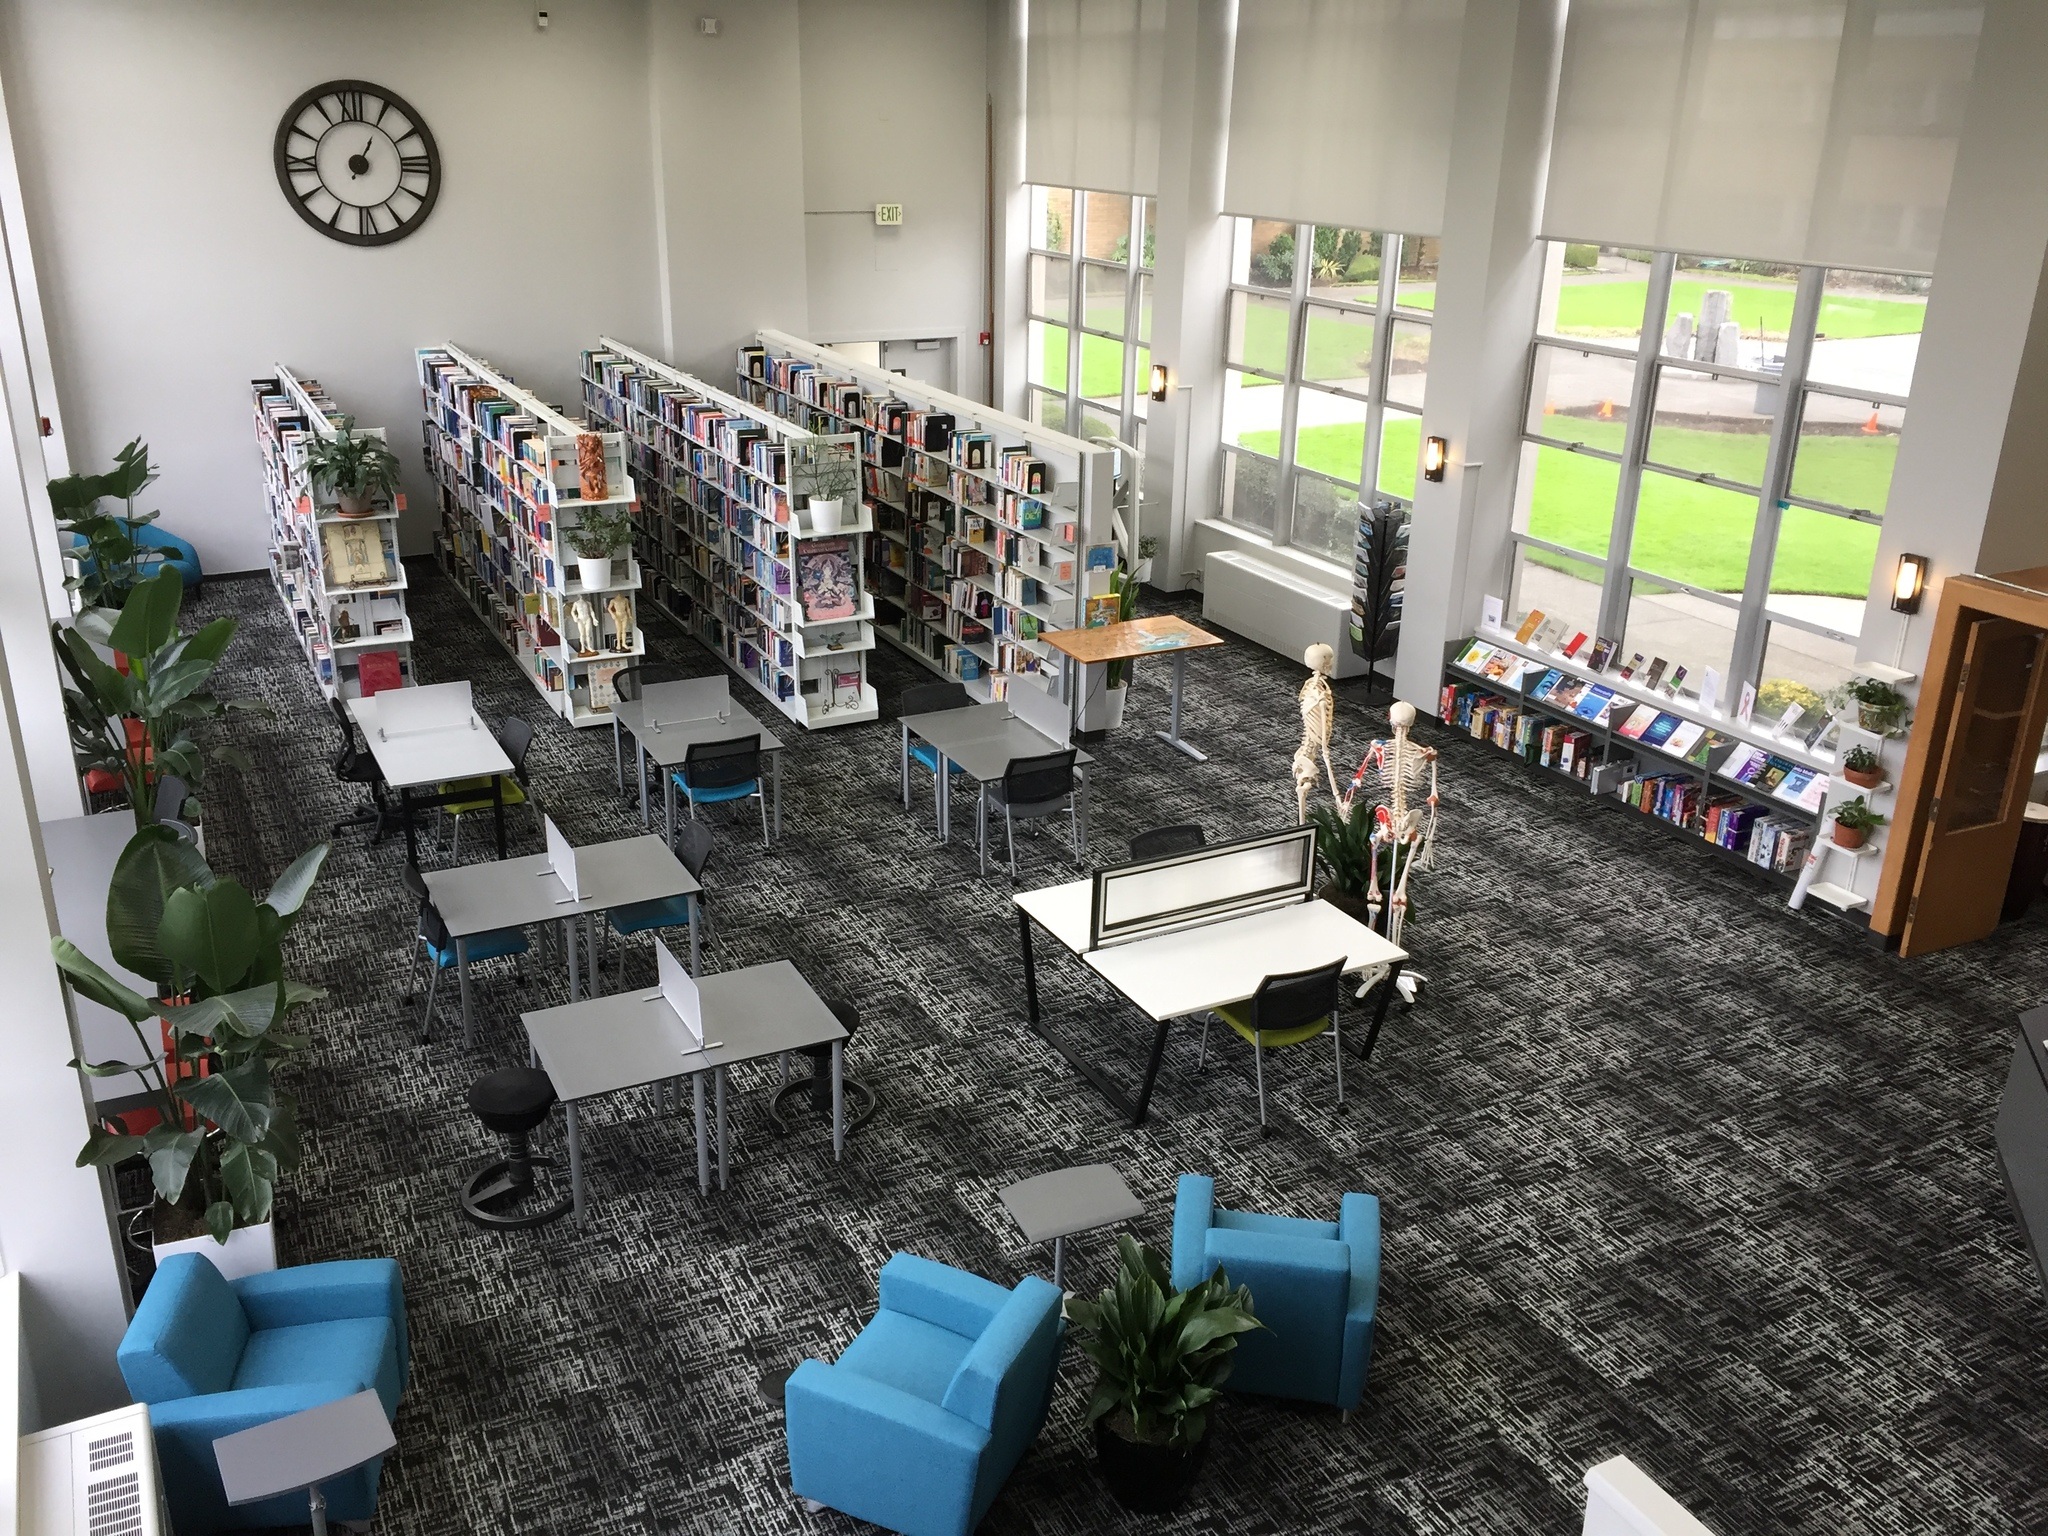 The updates to Bastyr University’s library include a variety of seating options for students who wish to study there. Contributed photo